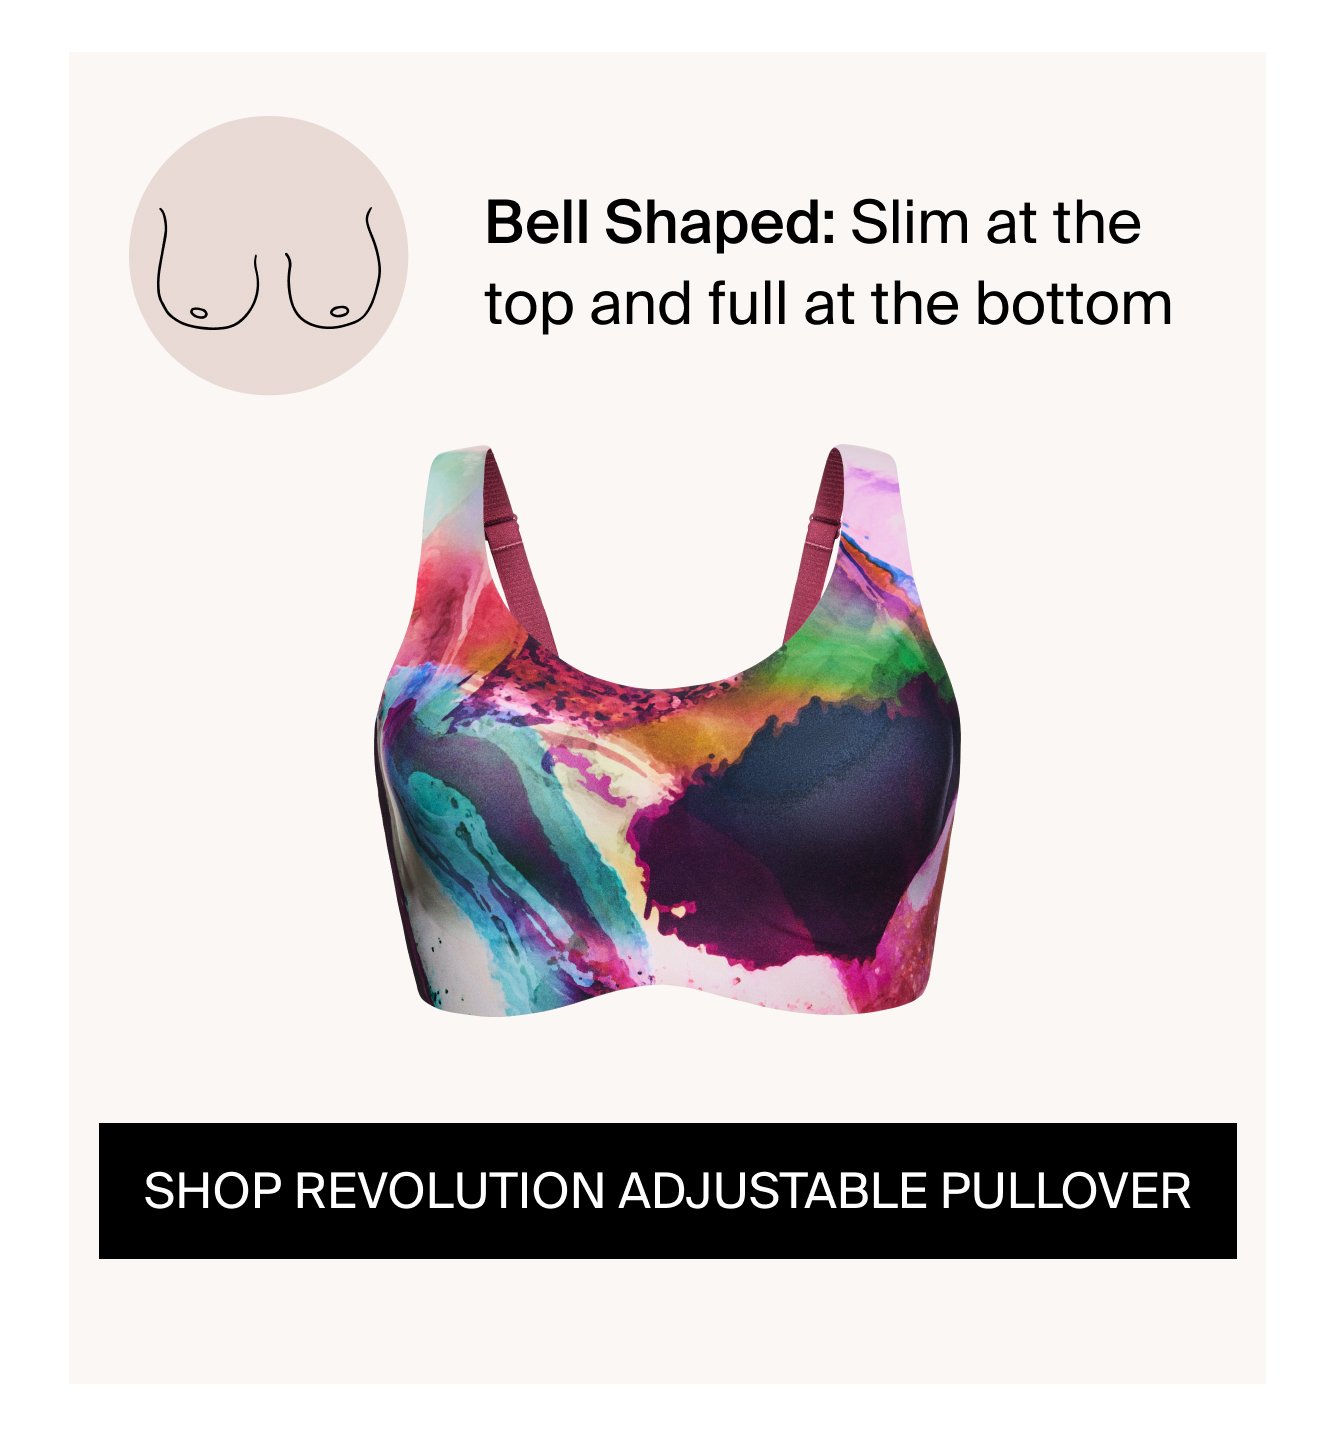 Bell Shaped: Slim at the top and full at the bottom. Shop Revolution Adjustable Pullover Bra